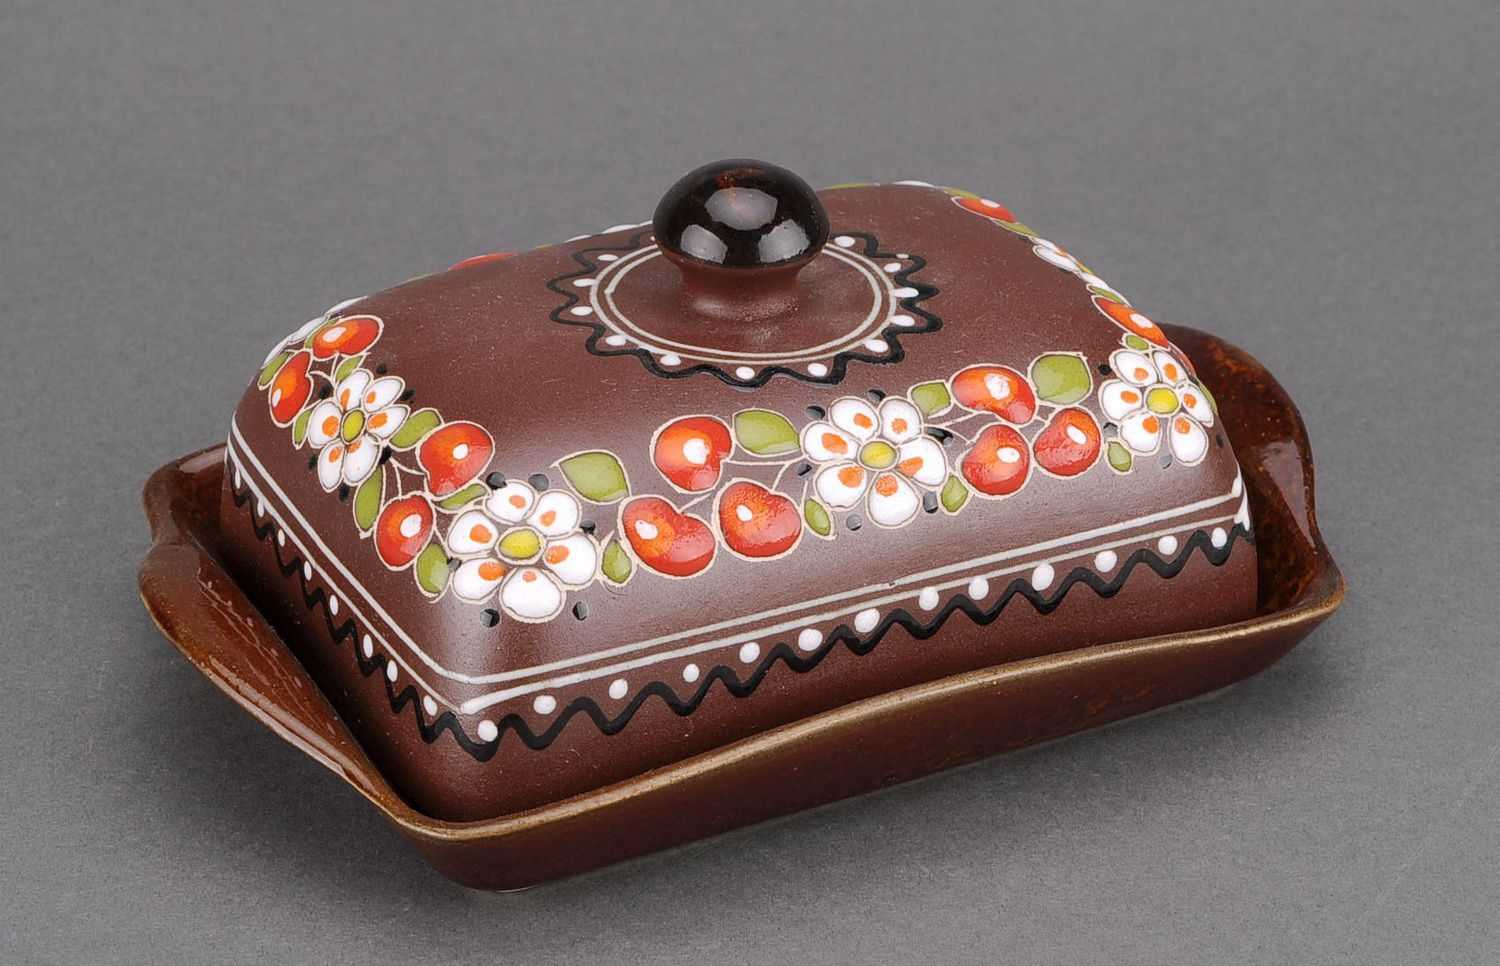 Ceramic patterned butter dish photo 1